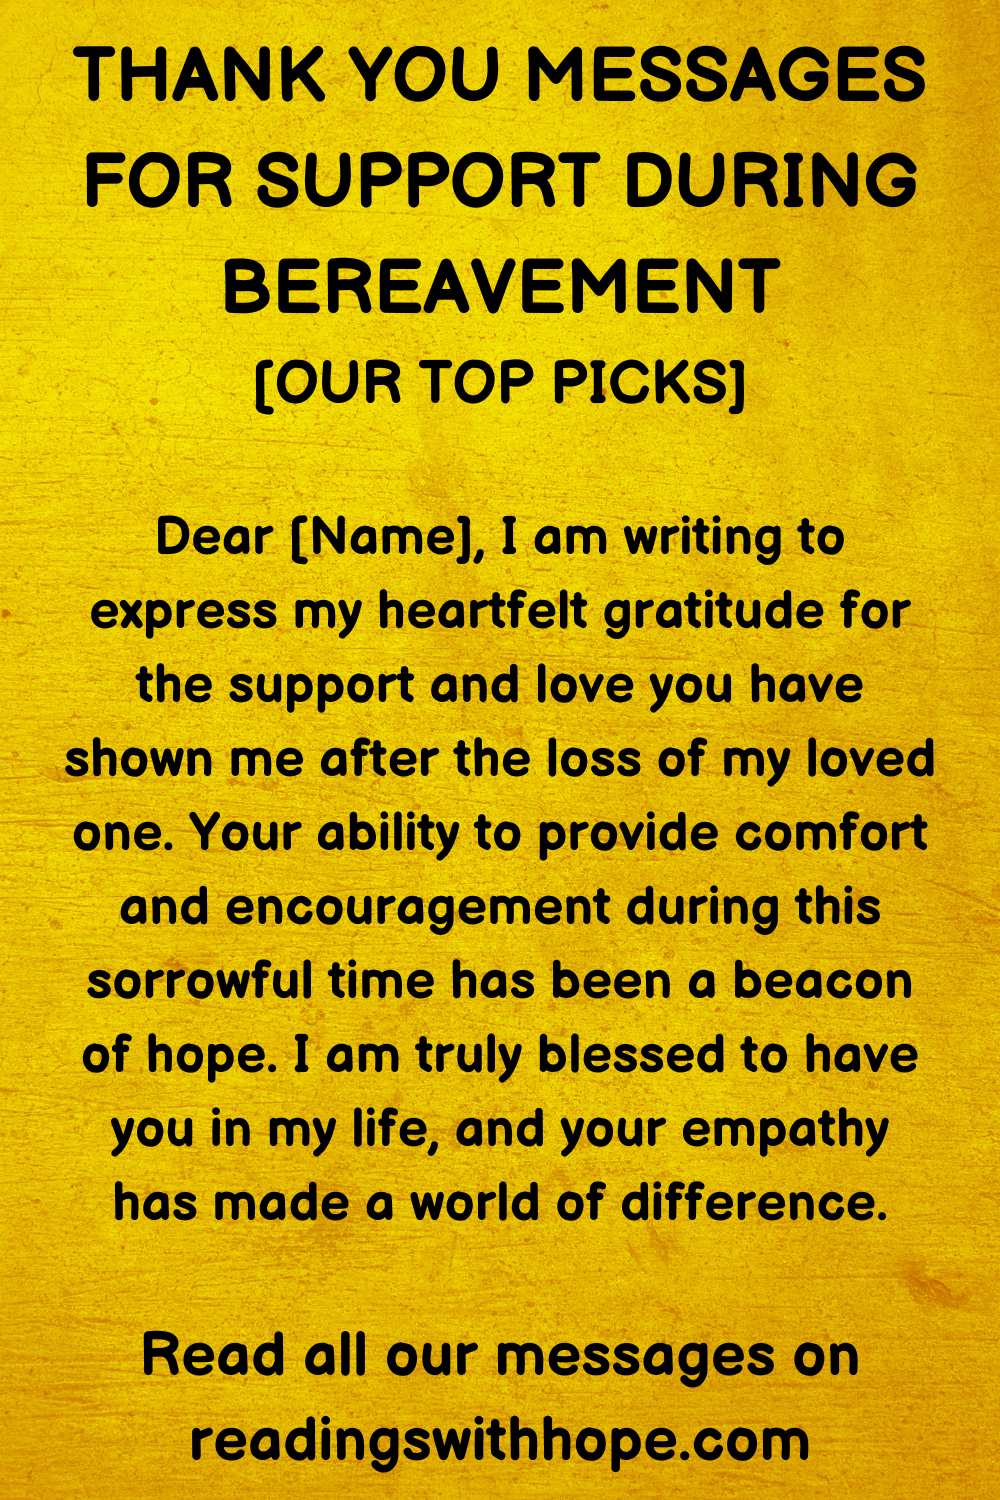 Thank You Message For Support During Bereavement
